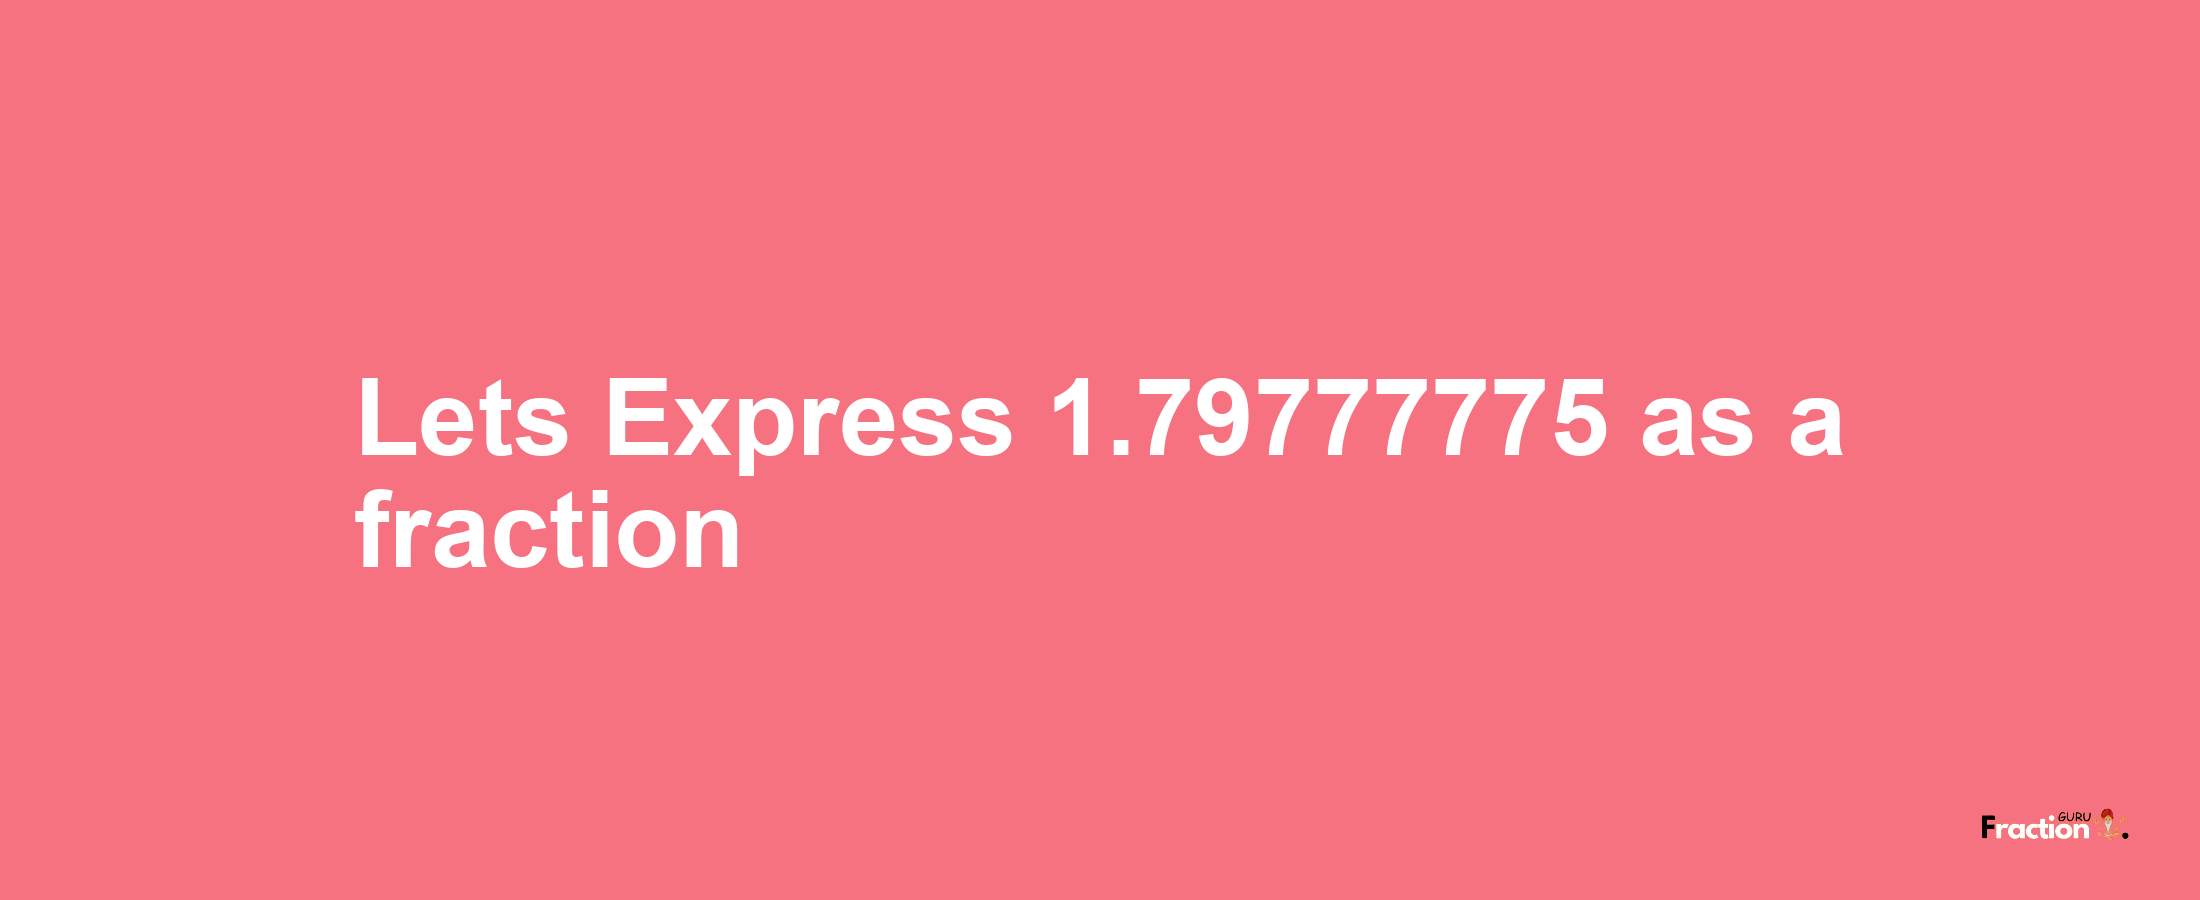 Lets Express 1.79777775 as afraction